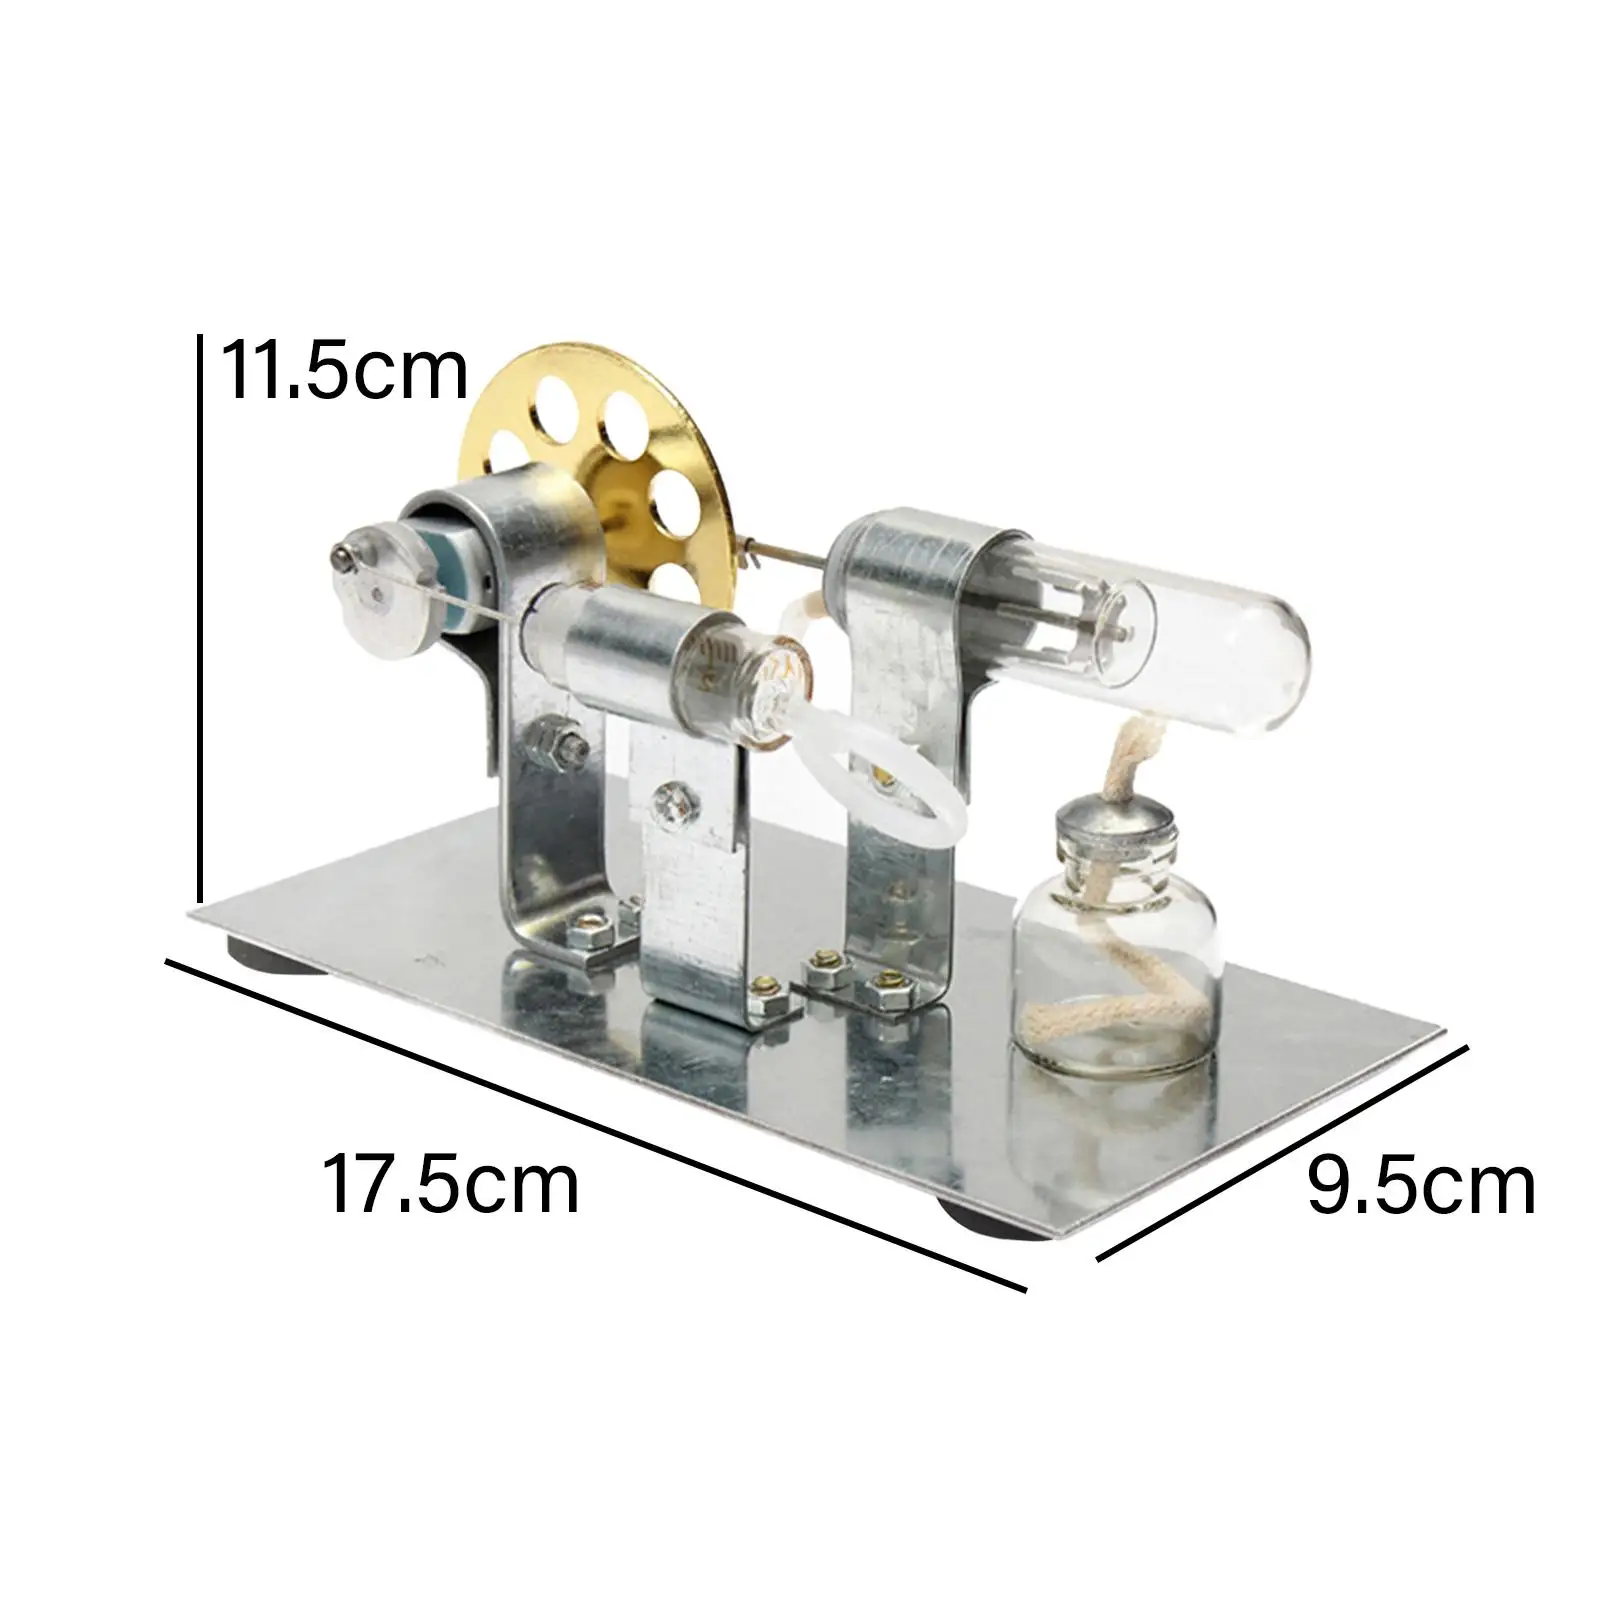 Stirling Engine Kits Steam Engine Home School Scientific DIY Steam Power Physics Science Experiment Toy for Kids 4 5 6 Children